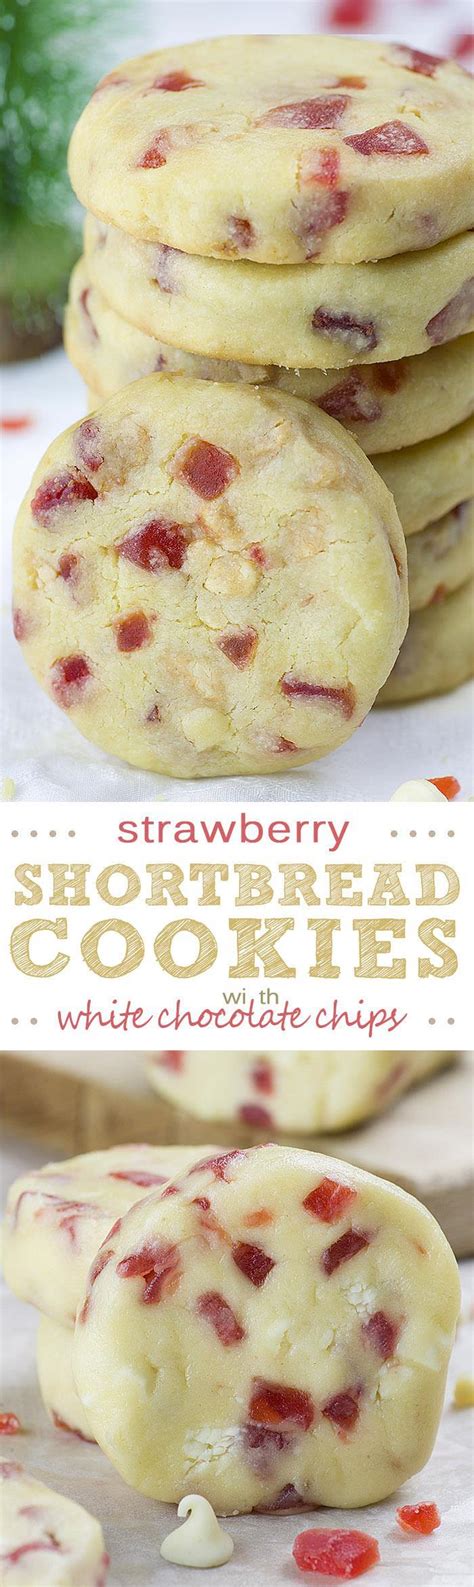 white-chocolate-strawberry-shortbread-cookies image